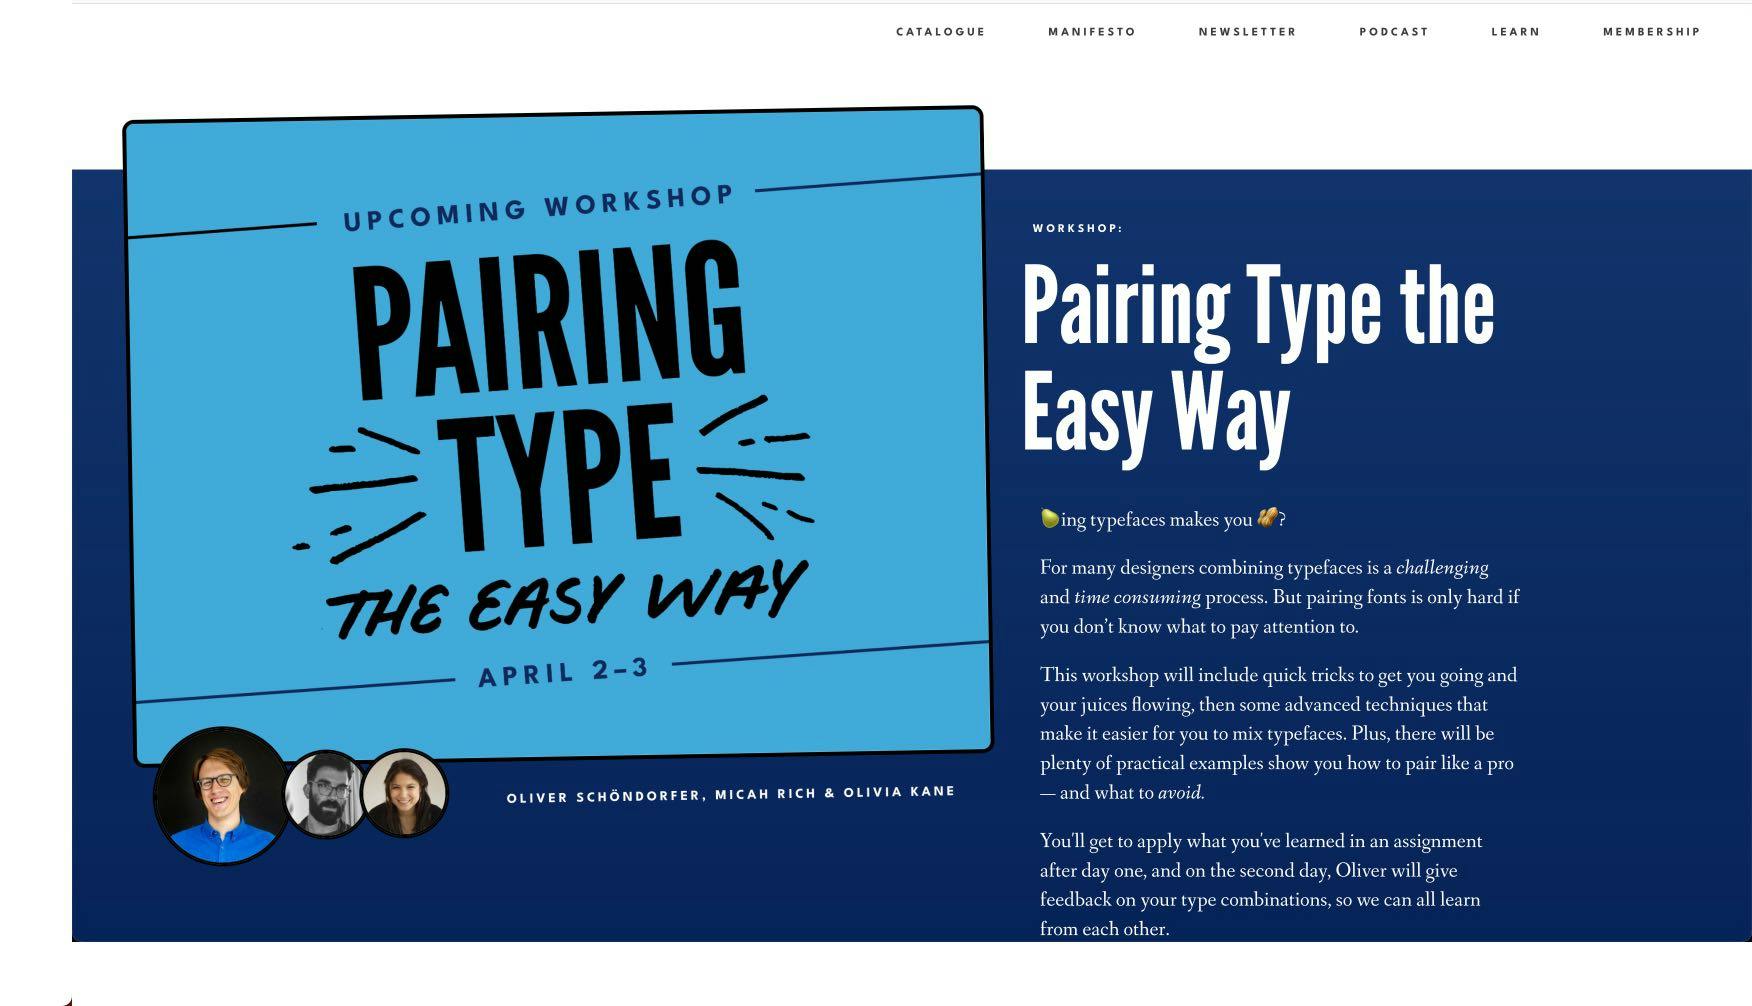 Designed & developed a series of online courses & partner workshops with leading typography experts. Ran both live & on-demand for memberships.